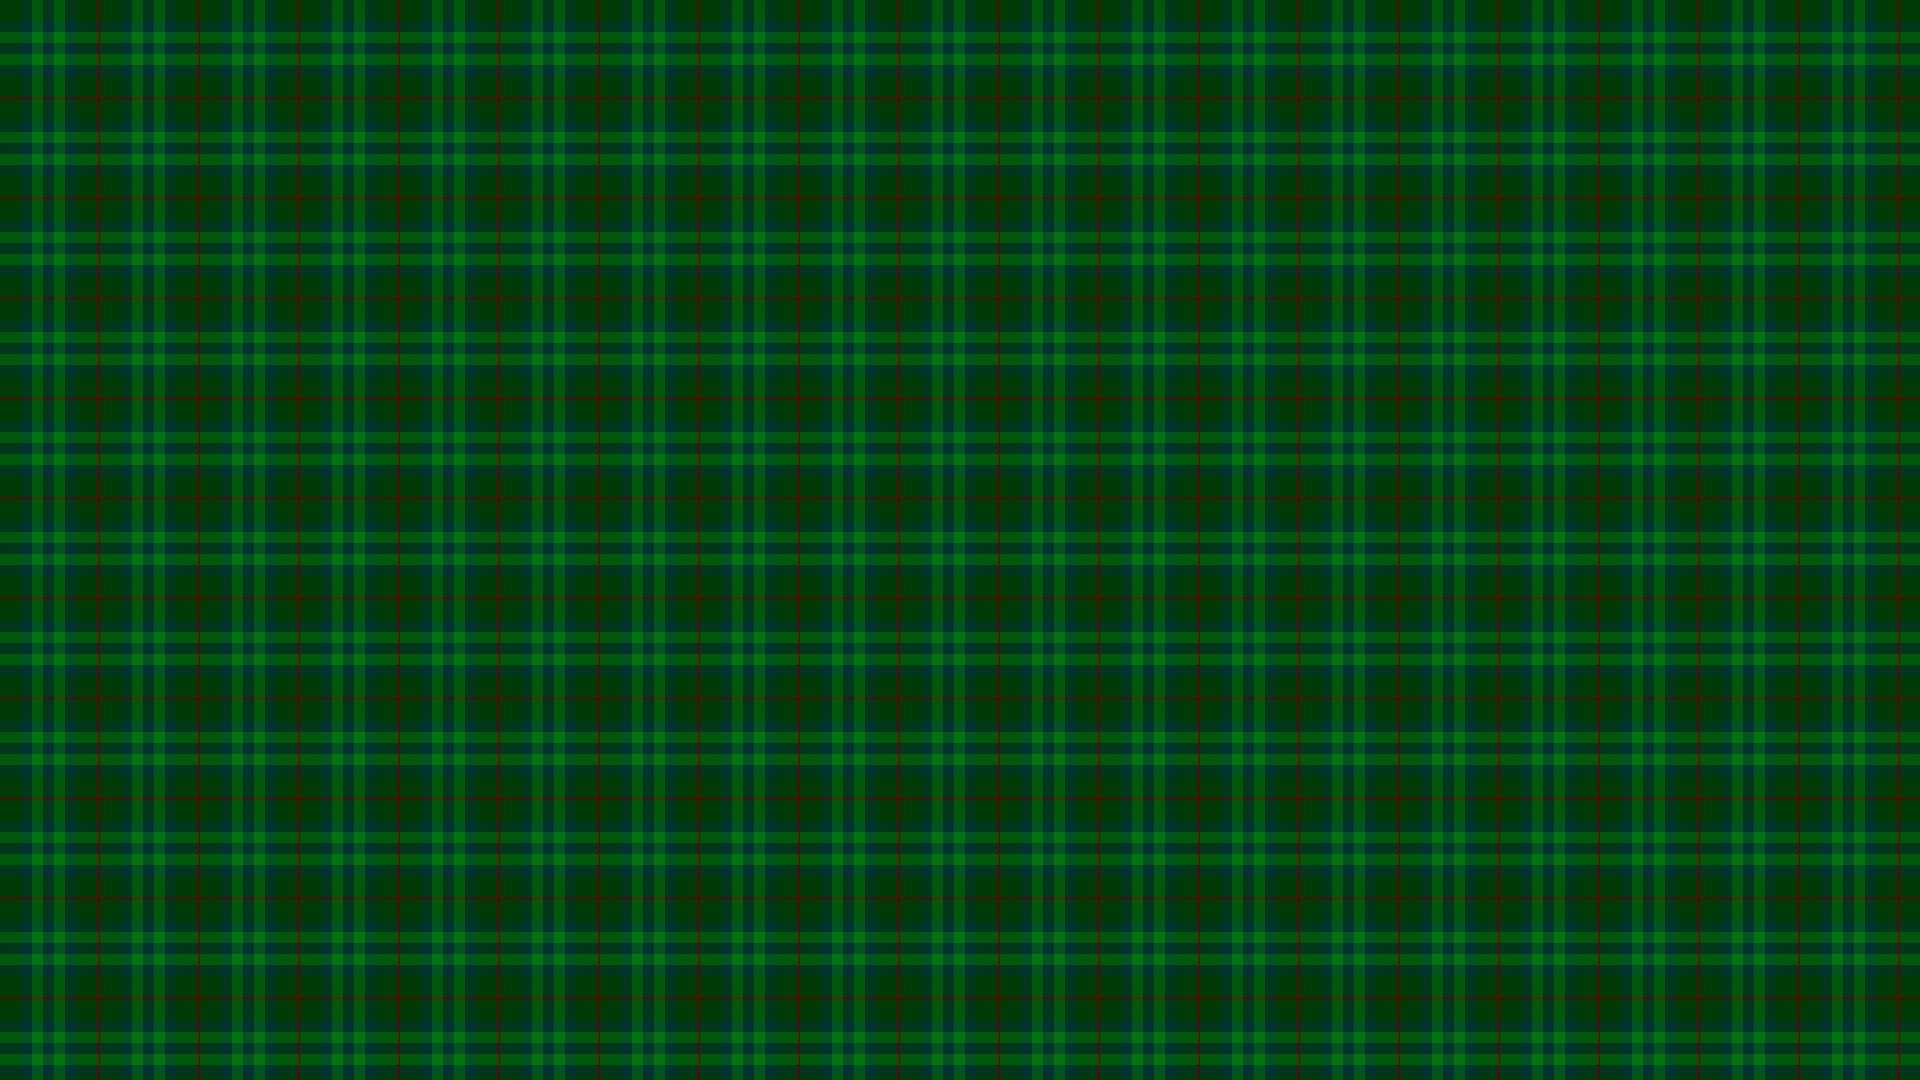 Plaid wallpapers, Top free, Plaid backgrounds, Abstract, 1920x1080 Full HD Desktop